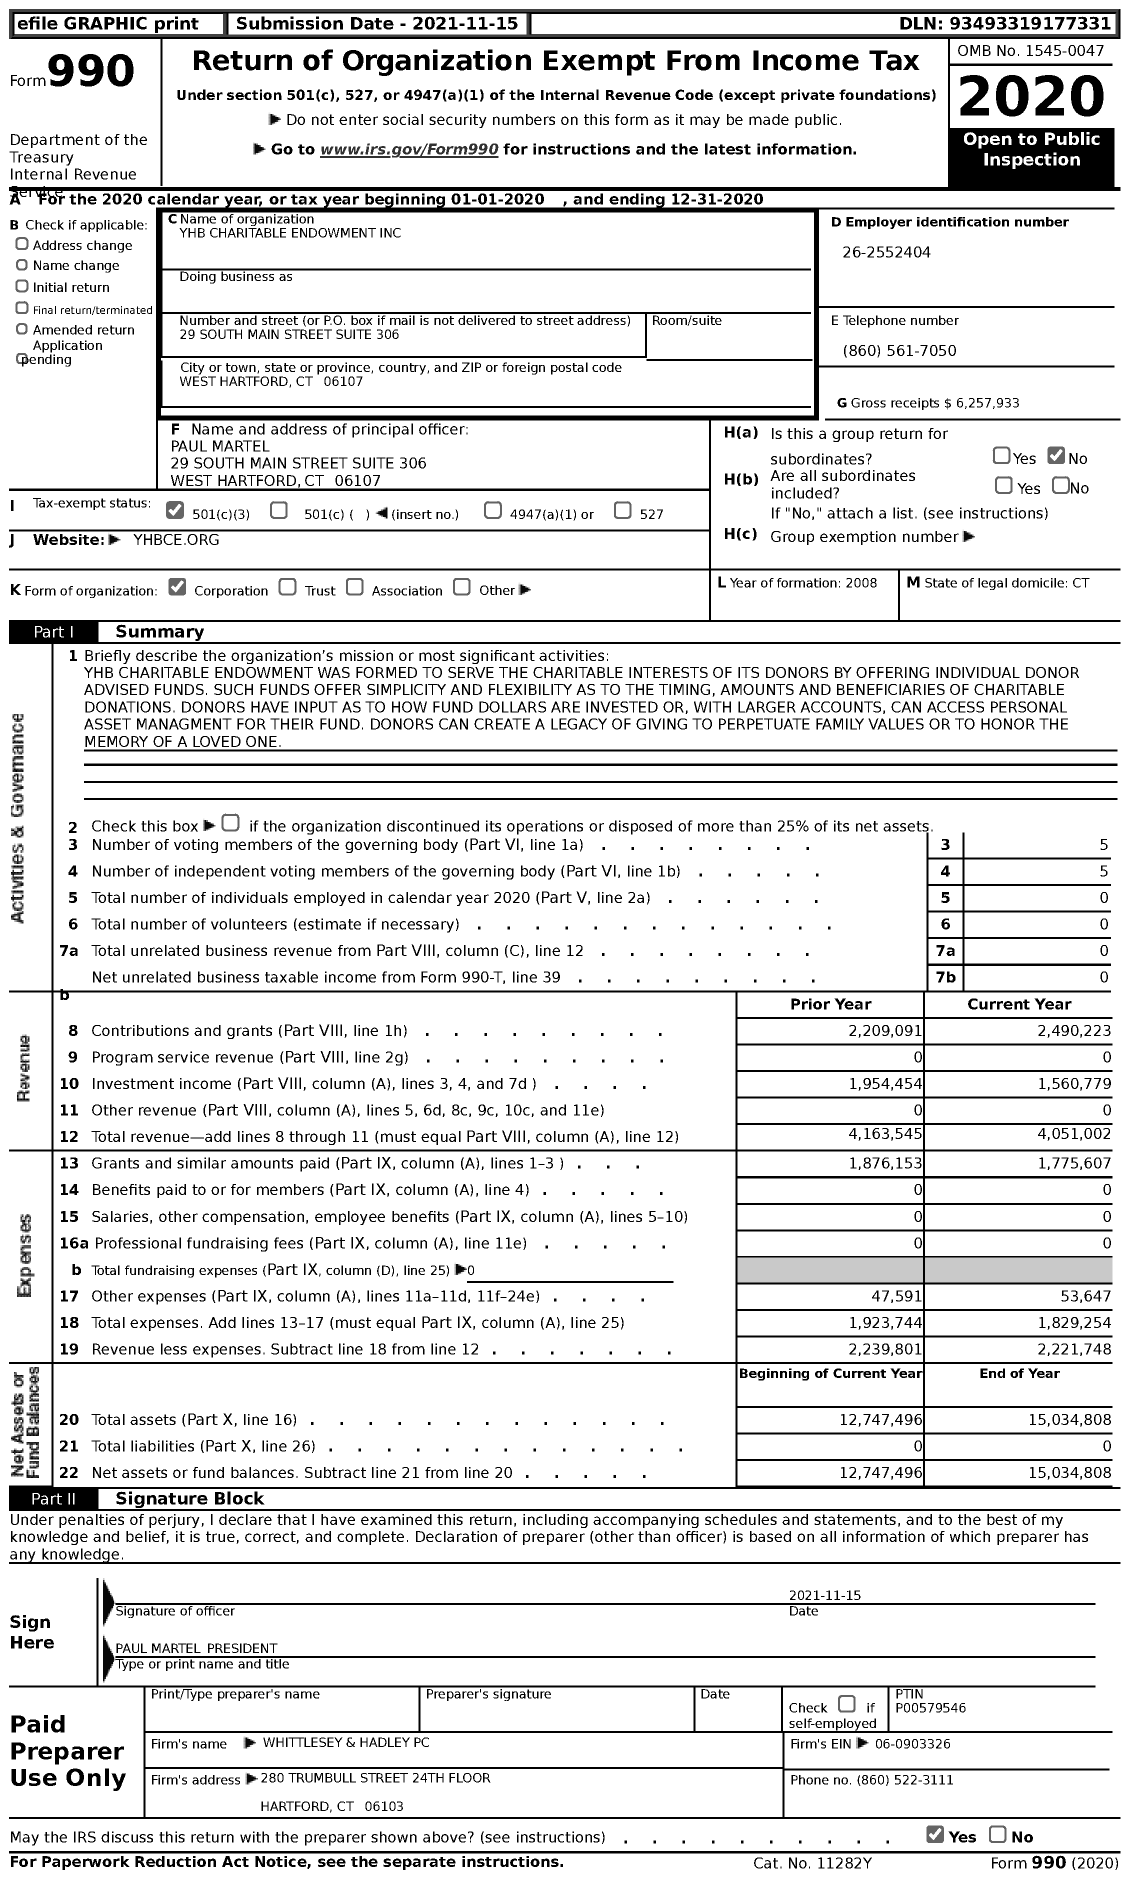 Image of first page of 2020 Form 990 for Yhb Charitable Endowment